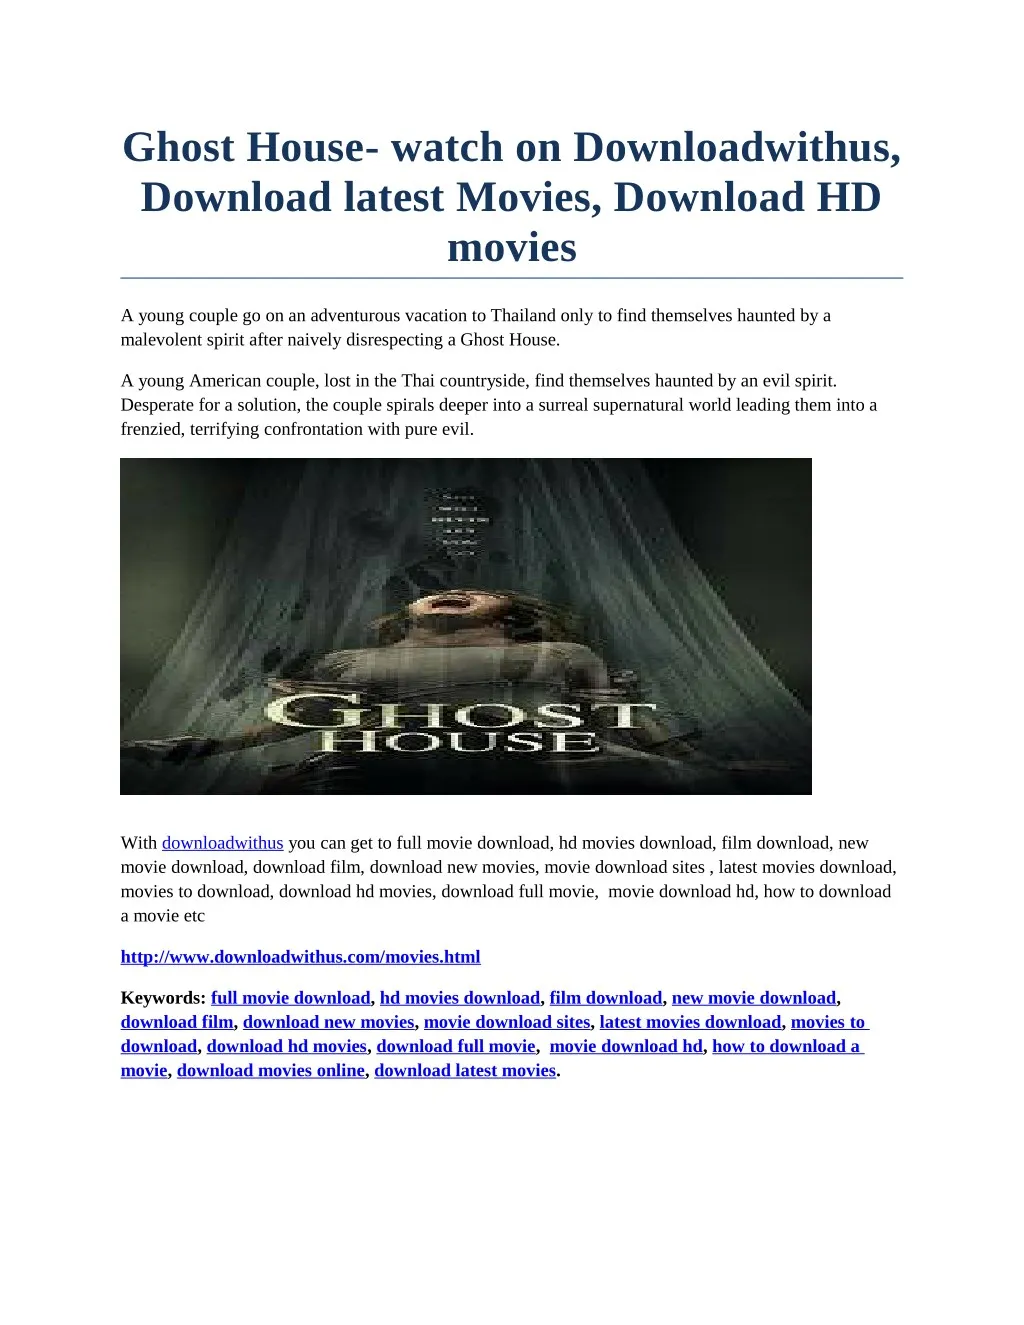 ghost house watch on downloadwithus download